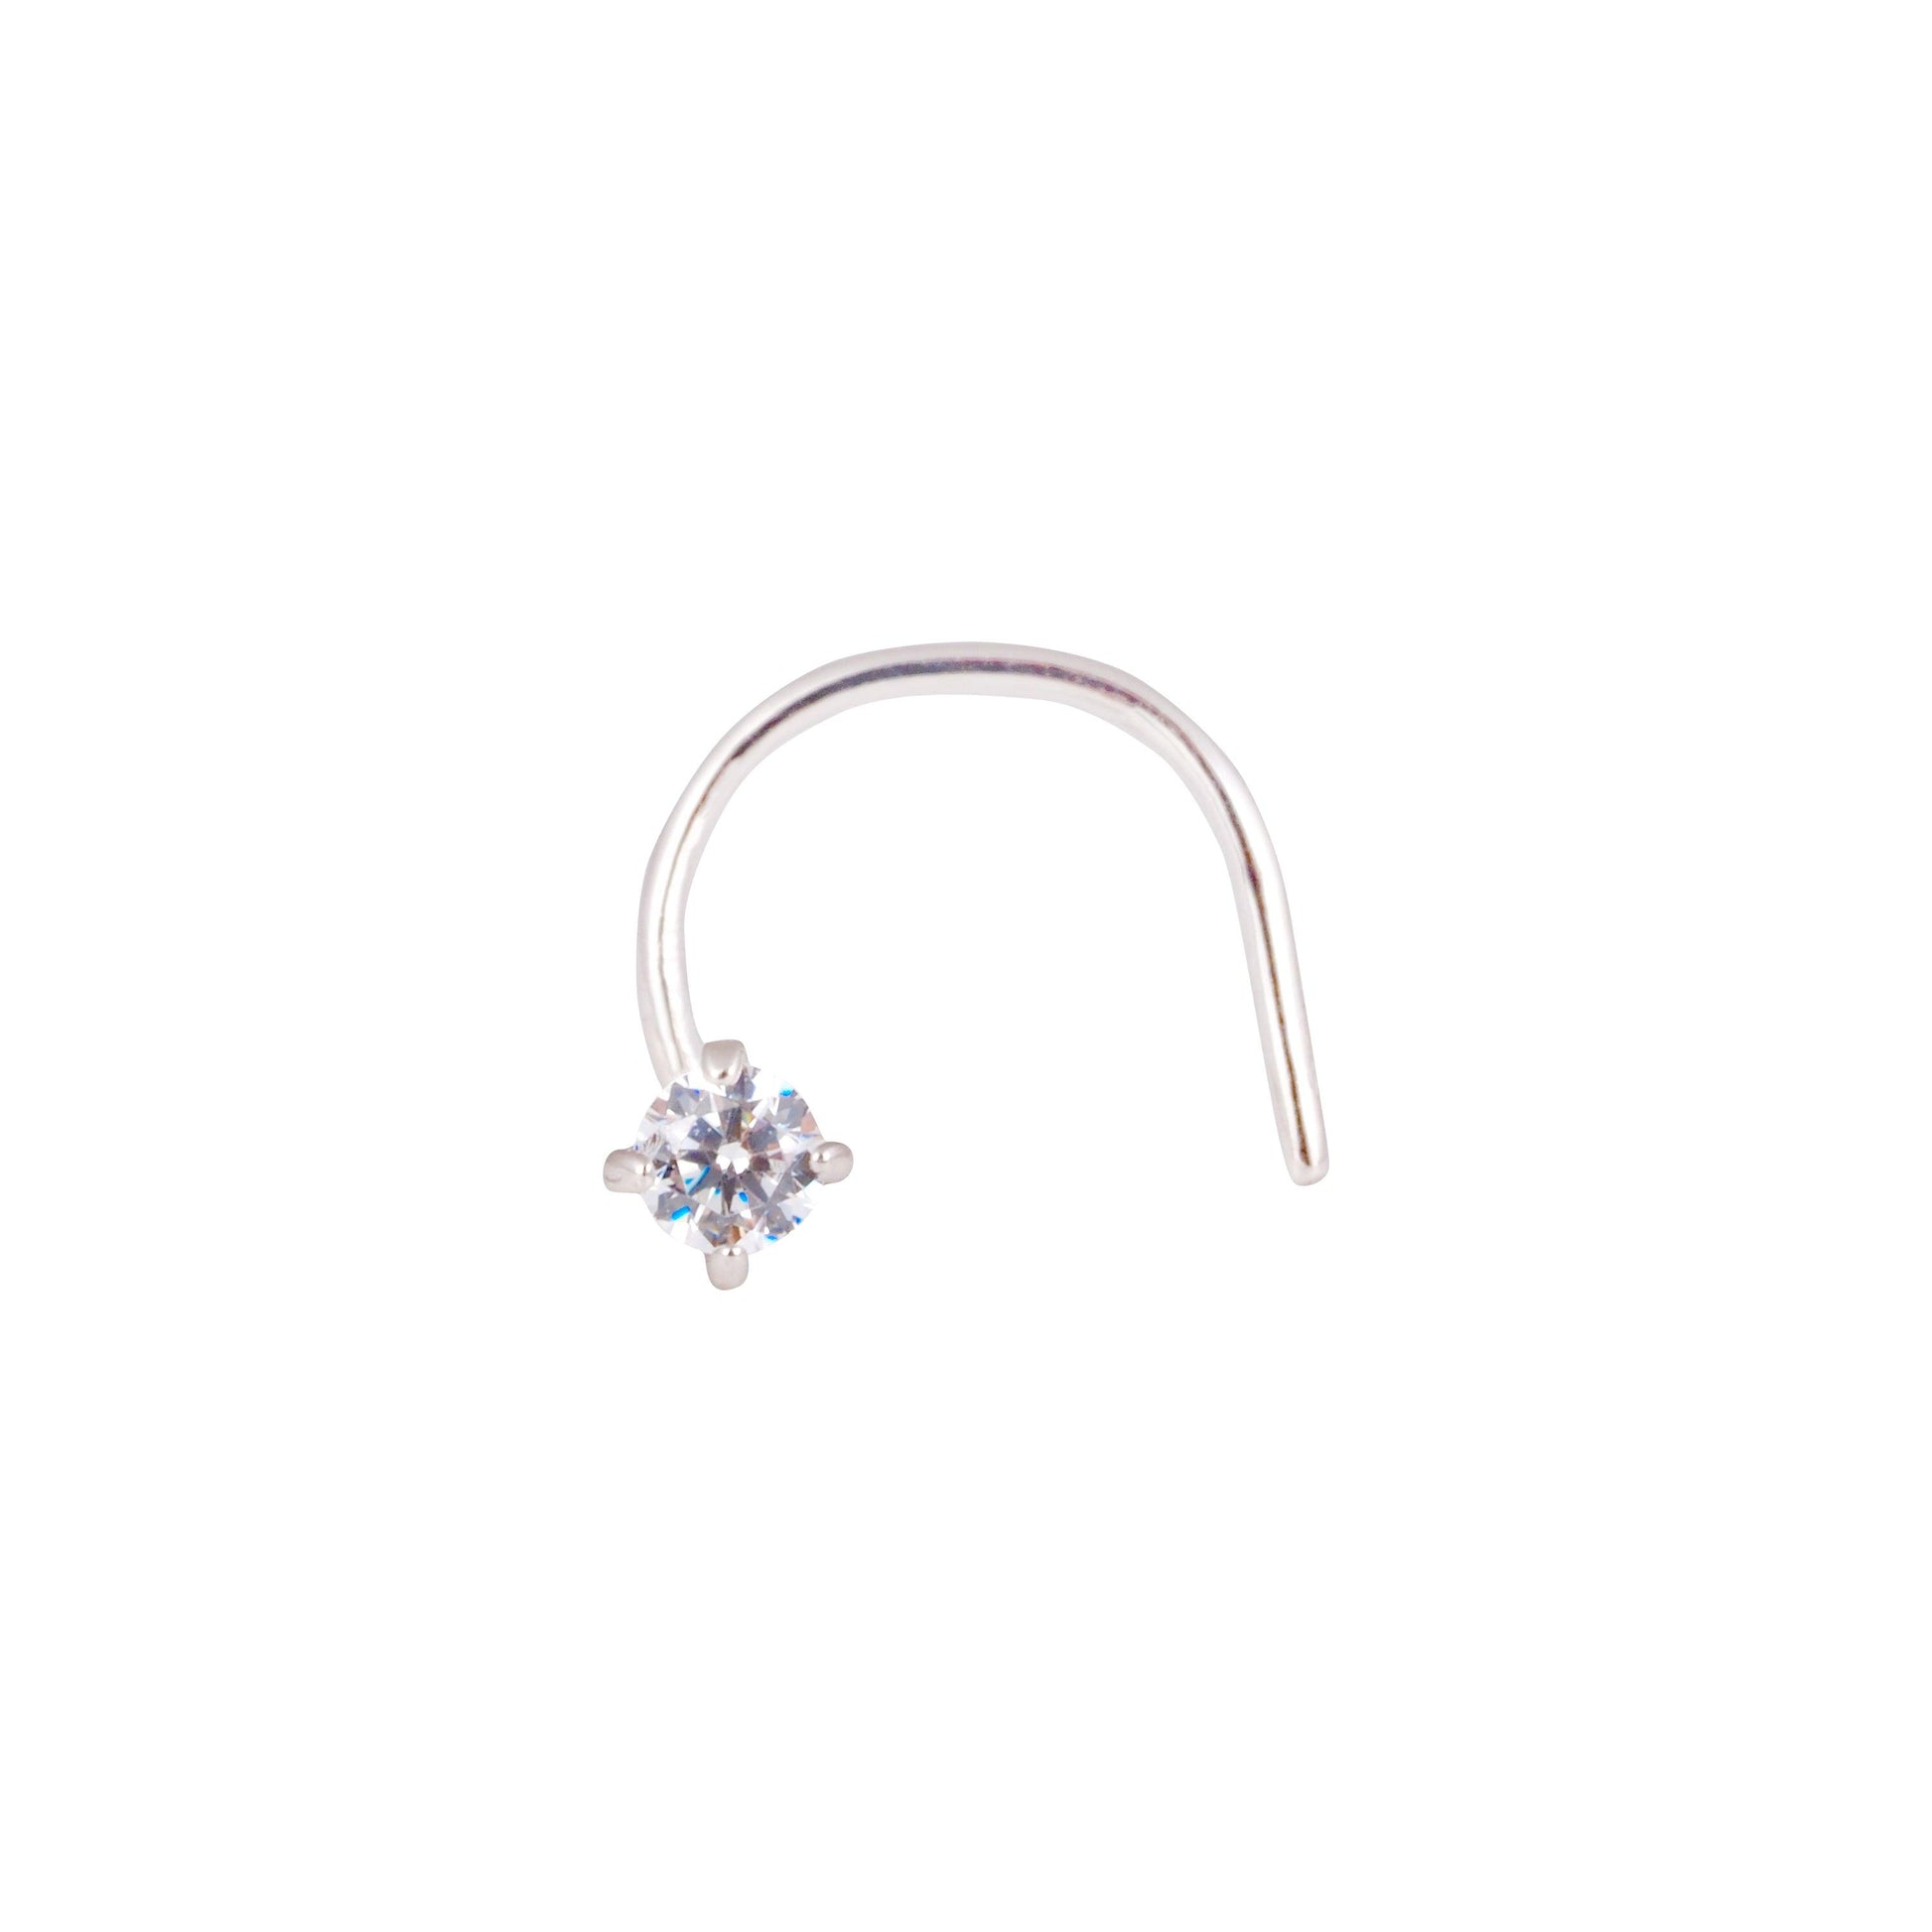 18ct Yellow / White Gold Wire Back Nose Stud with Cubic Zirconia Stone in a Four Claw Setting (1.5mm - 3.5mm) NS-7560 - Minar Jewellers